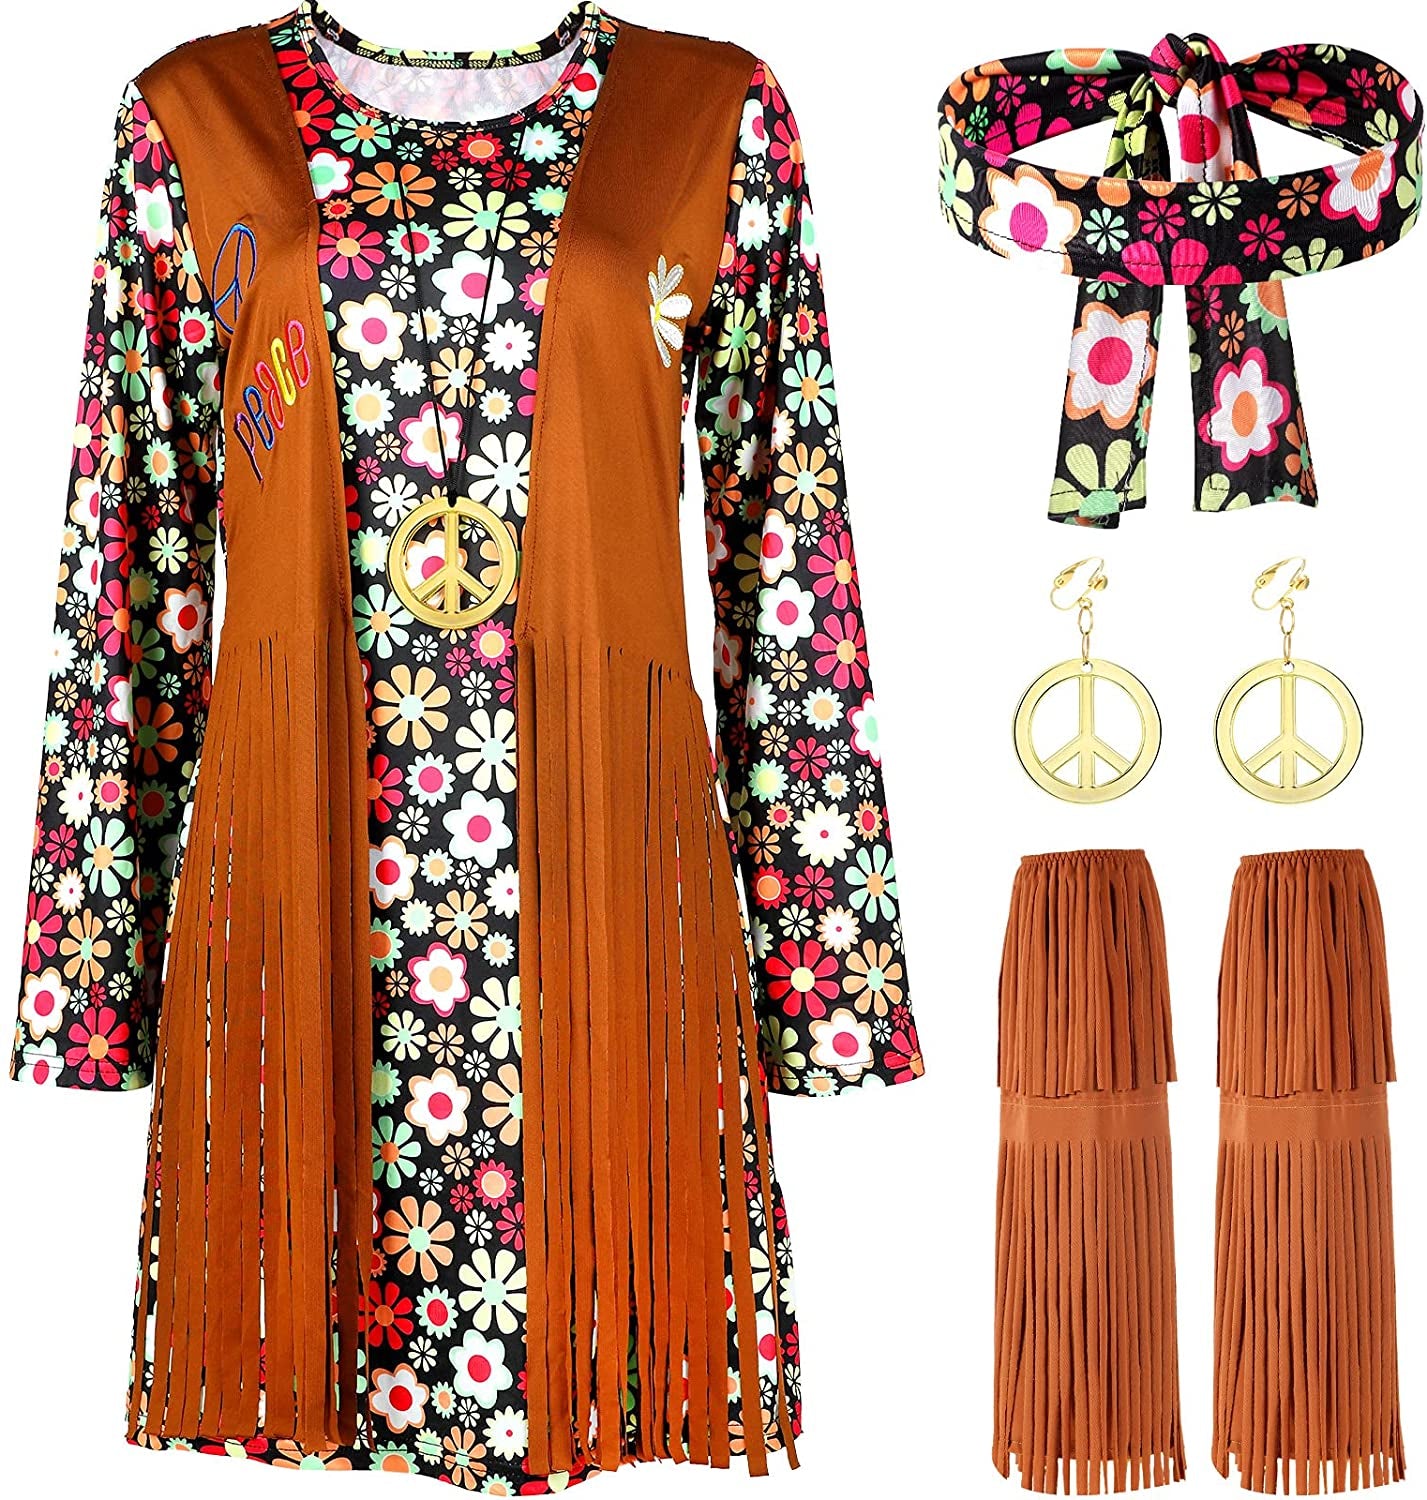 Poor Quality-Women Hippie Costume Set Peace Sign Earring Necklace Headband Dress Ankle Socks Poor Quality